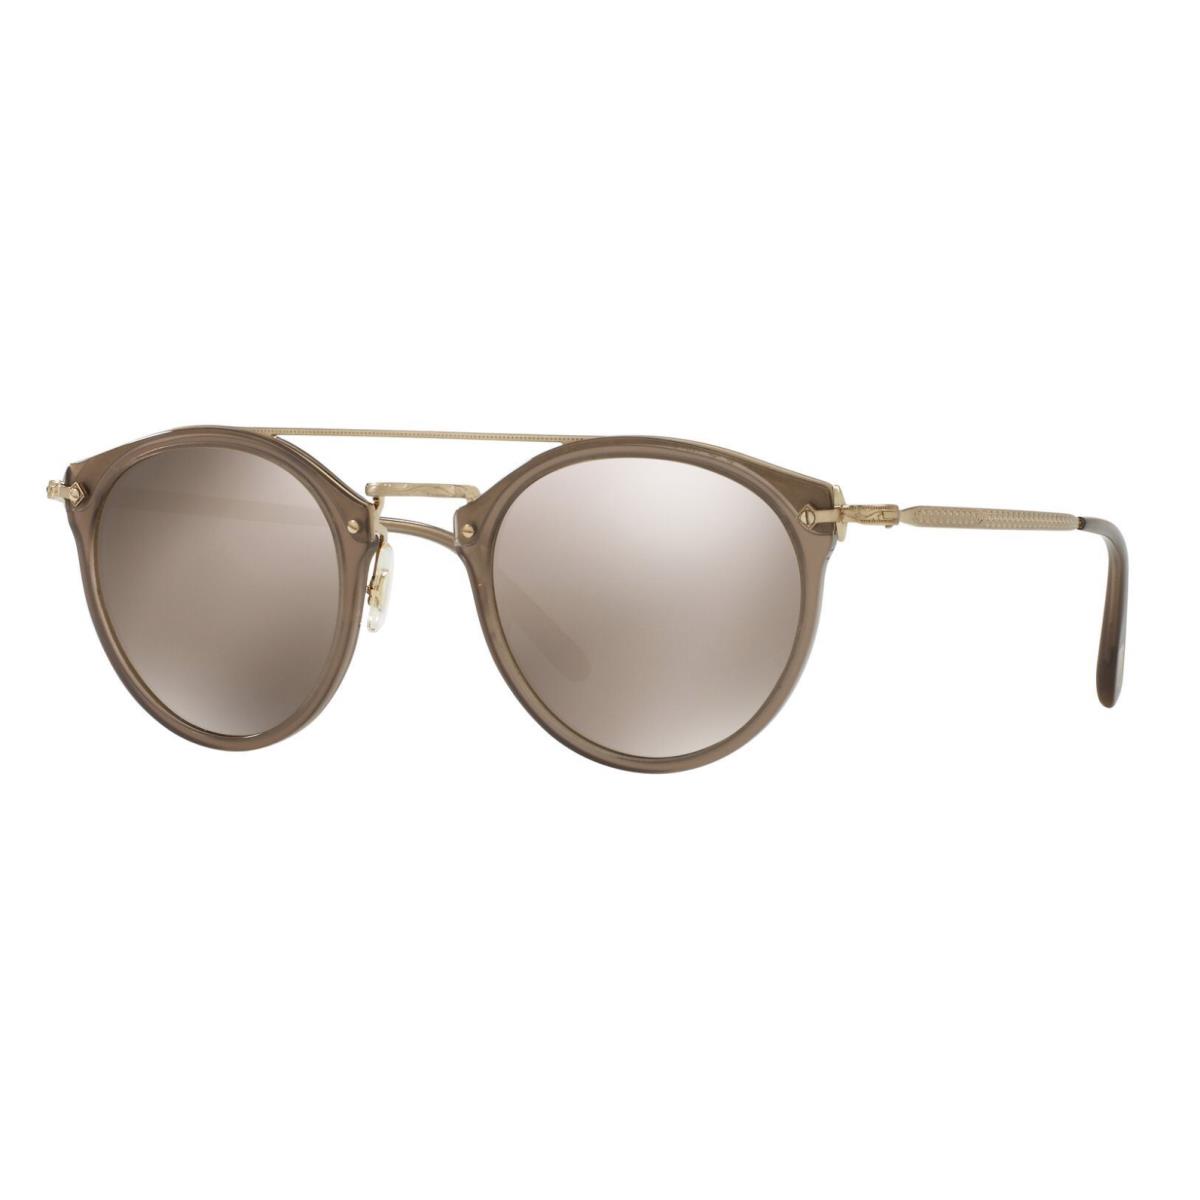 Oliver Peoples Womens Remick 50mm Taupe Mirrored Brow Bar Sunglasses S3838